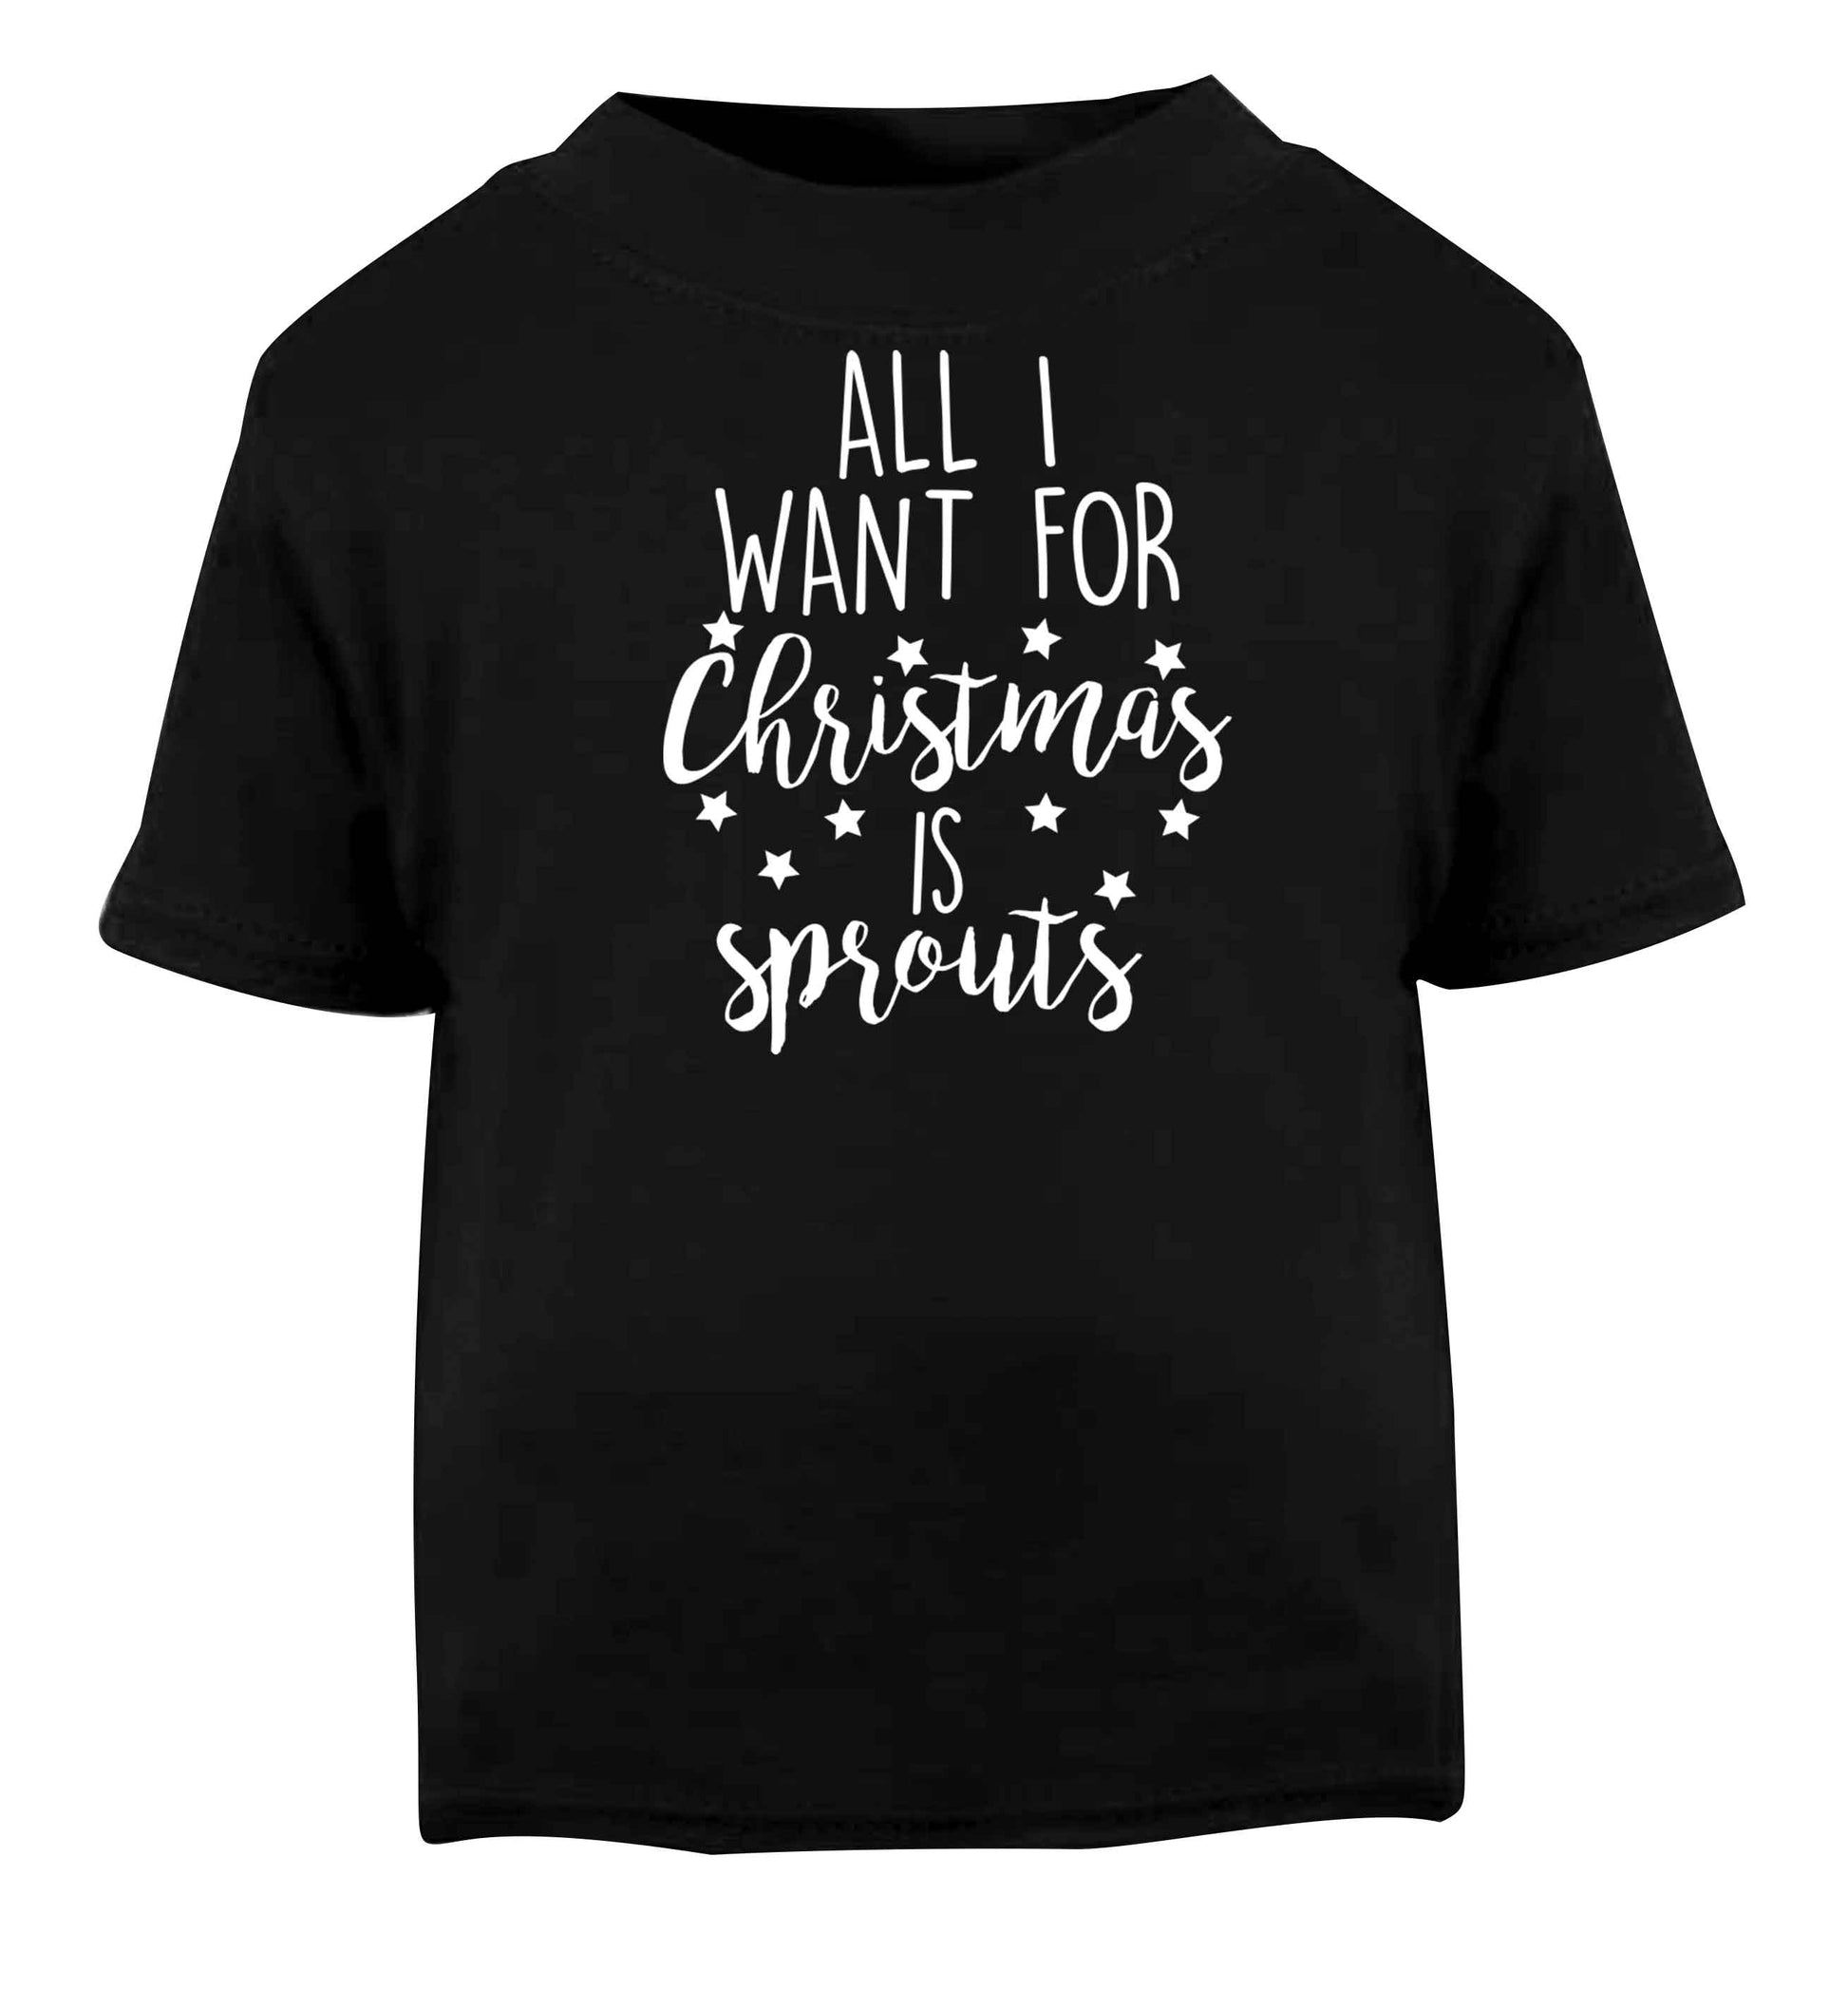 All I want for Christmas is sprouts Black baby toddler Tshirt 2 years